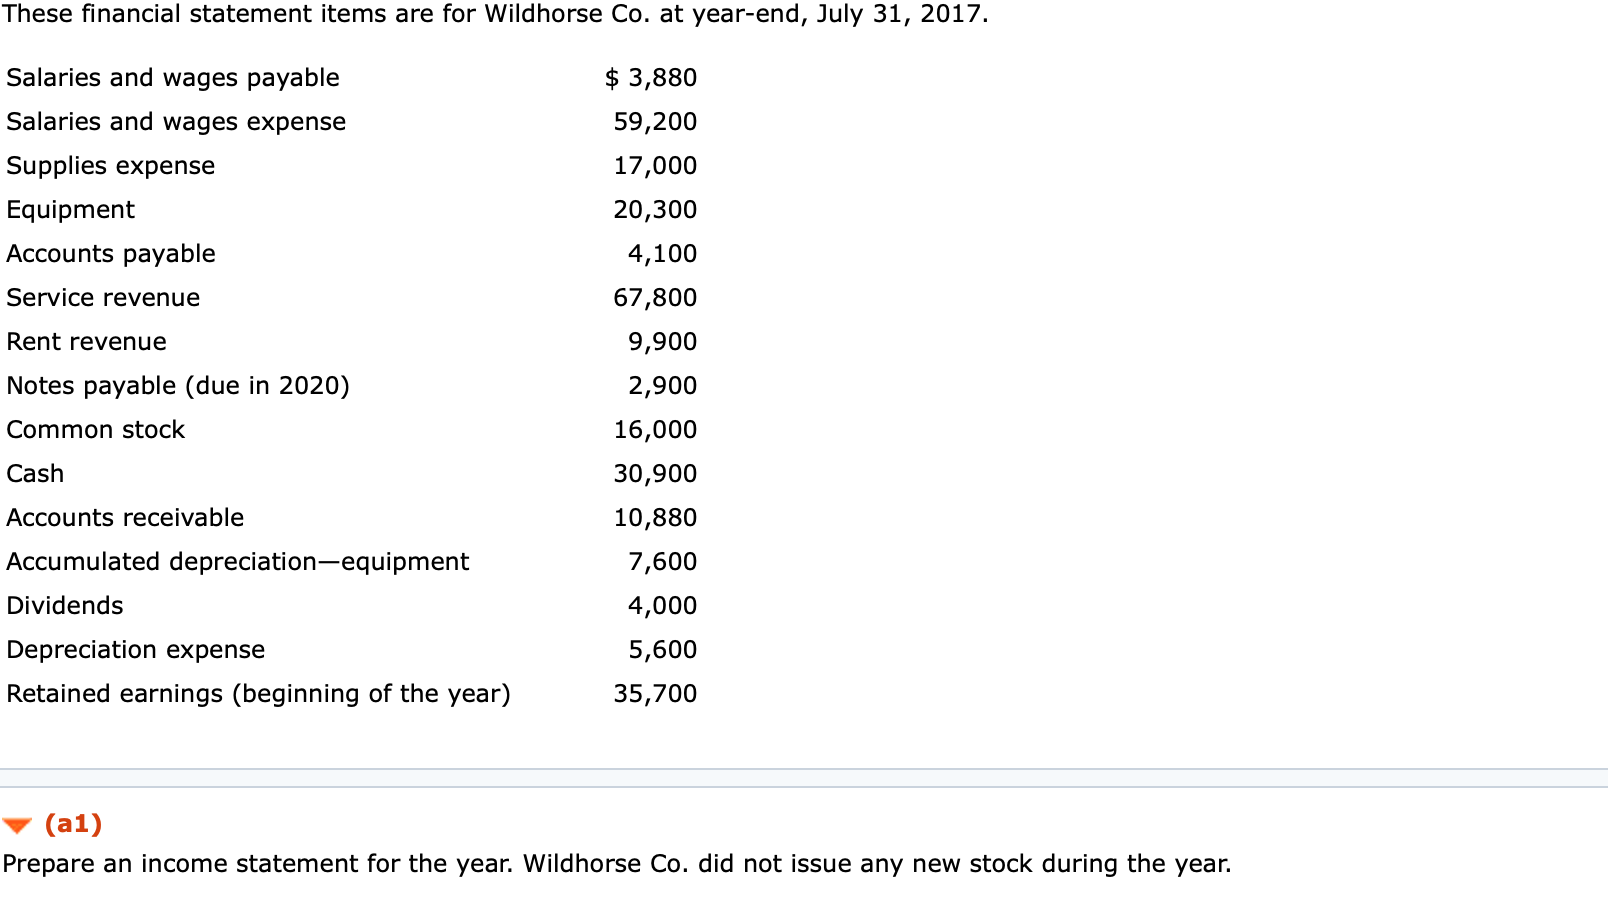 These financial statement items are for Wildhorse Co. at year-end, July 31, 2017.
Salaries and wages payable
$ 3,880
Salaries and wages expense
59,200
Supplies expense
17,000
Equipment
20,300
Accounts payable
4,100
Service revenue
67,800
Rent revenue
9,900
Notes payable (due in 2020)
2,900
Common stock
16,000
Cash
30,900
Accounts receivable
10,880
Accumulated depreciation-equipment
7,600
Dividends
4,000
Depreciation expense
5,600
Retained earnings (beginning of the year)
35,700
(a1)
Prepare an income statement for the year. Wildhorse Co. did not issue any new stock during the year.
